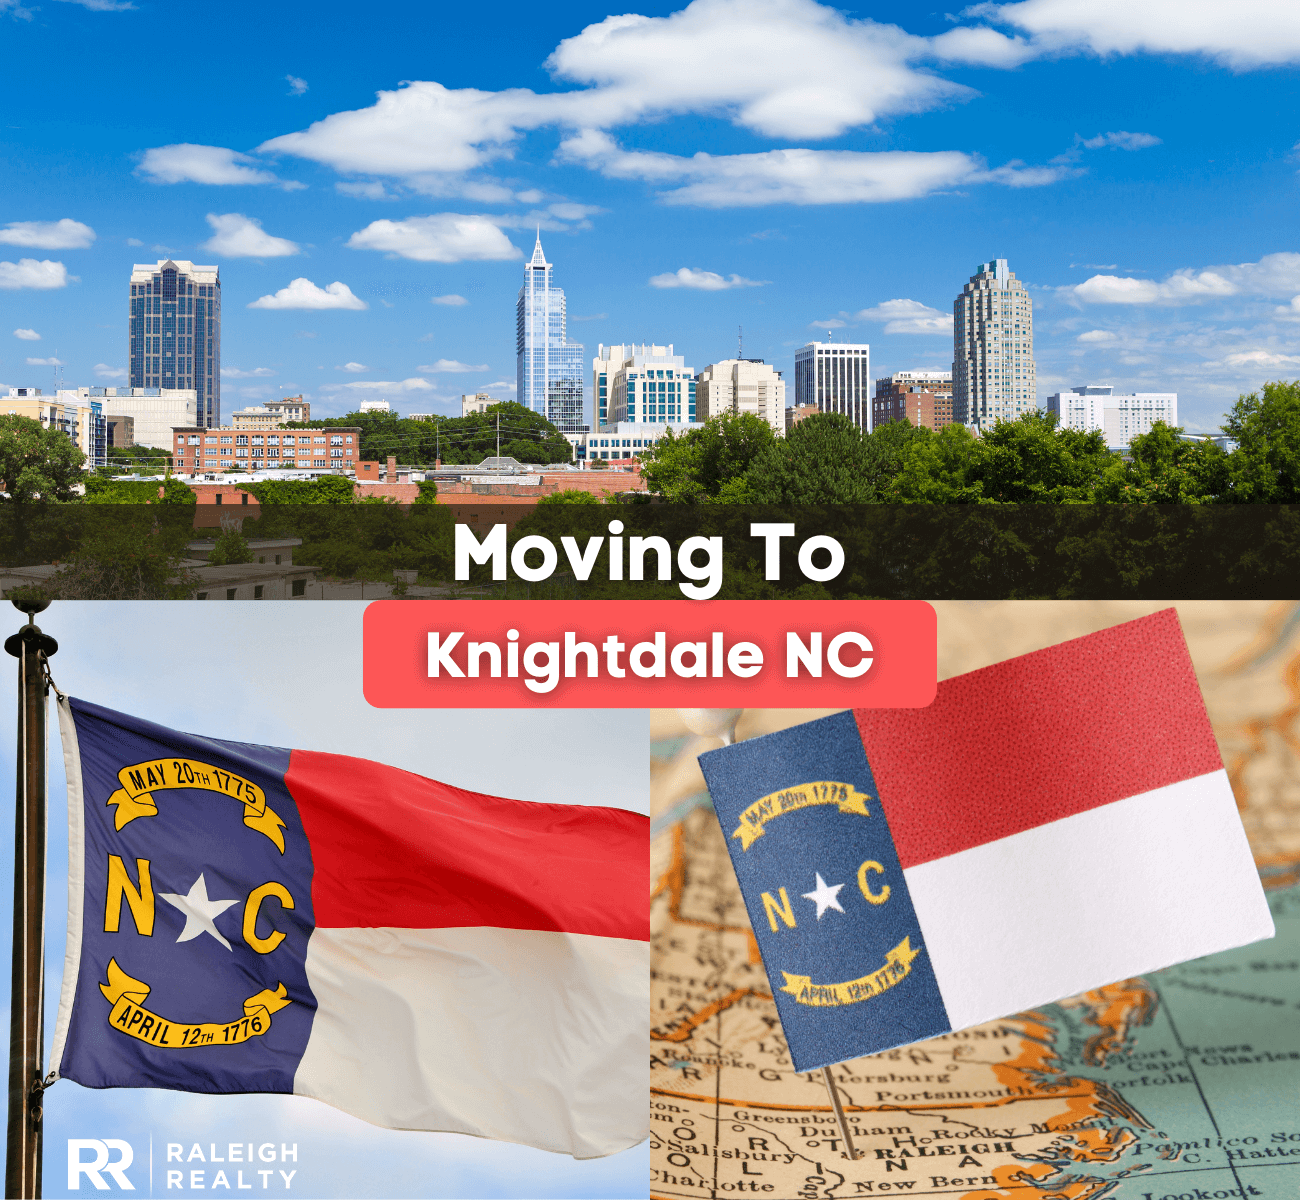 Moving too Knightdale, NC - What is it like living in Knightdale, North Carolina?